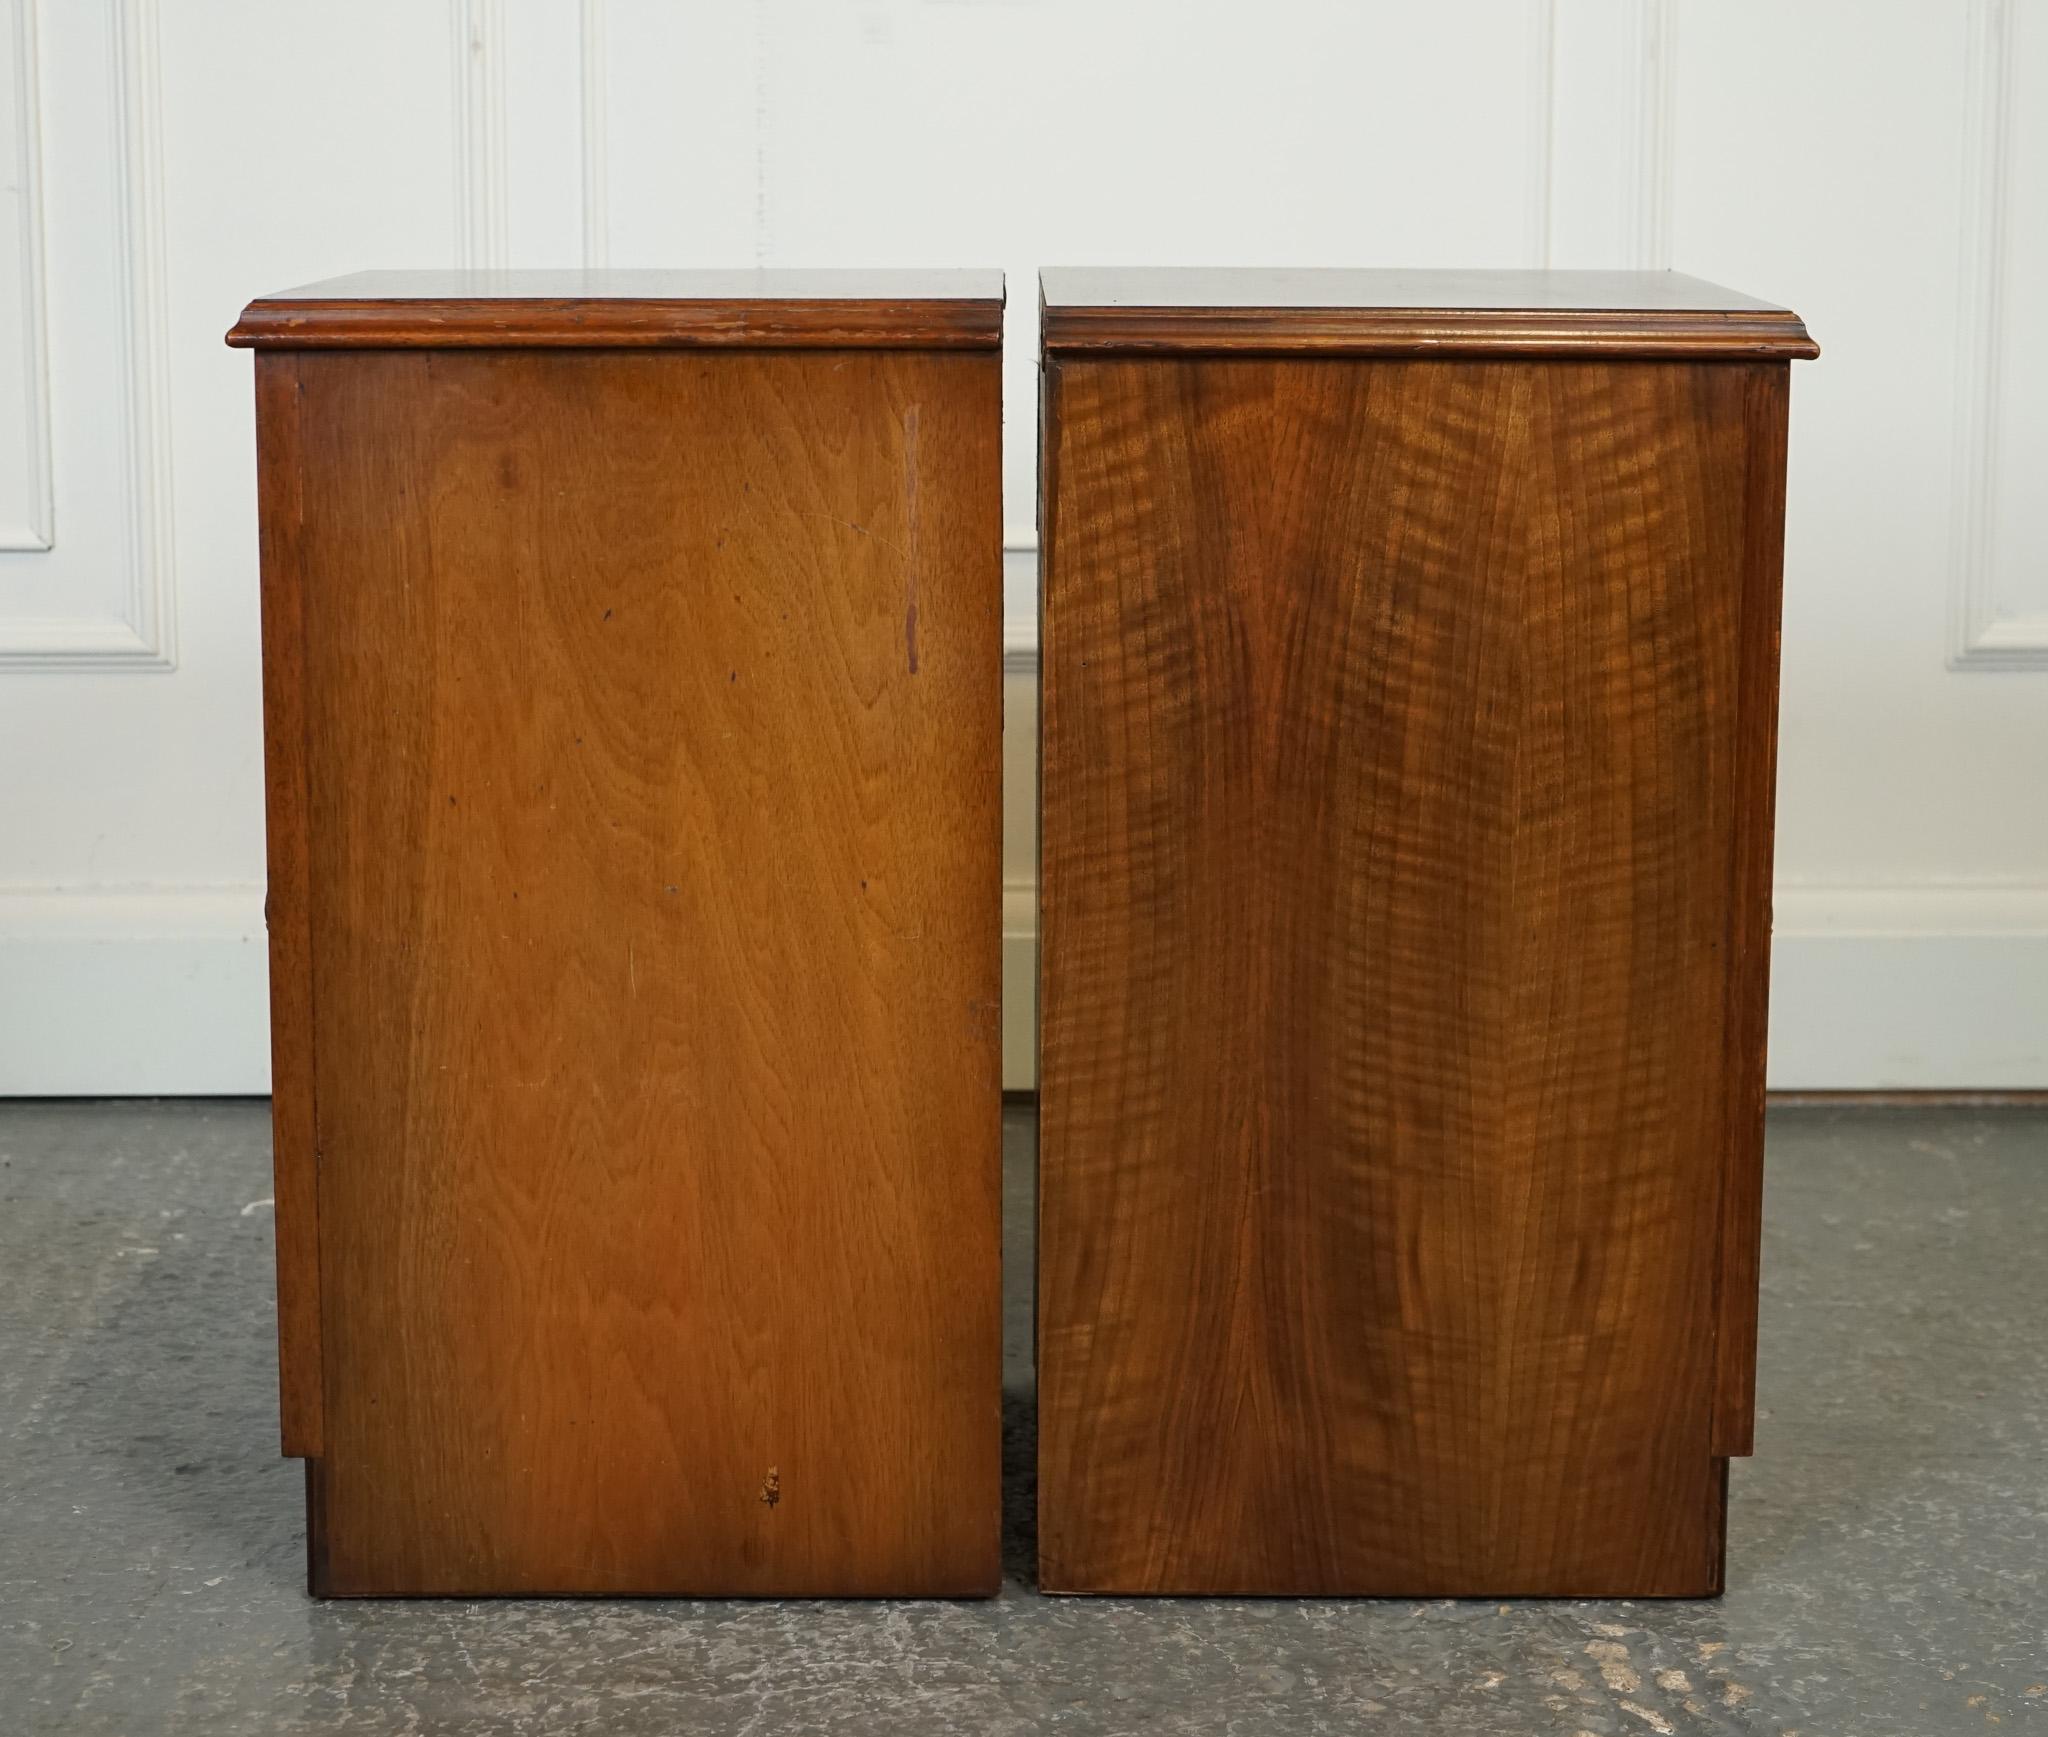 British PAIR 1920'S ART DECO BEDSIDE NIGHTSTANDS SIDE END LAMP TABLES WiTH STORAGE SPACE